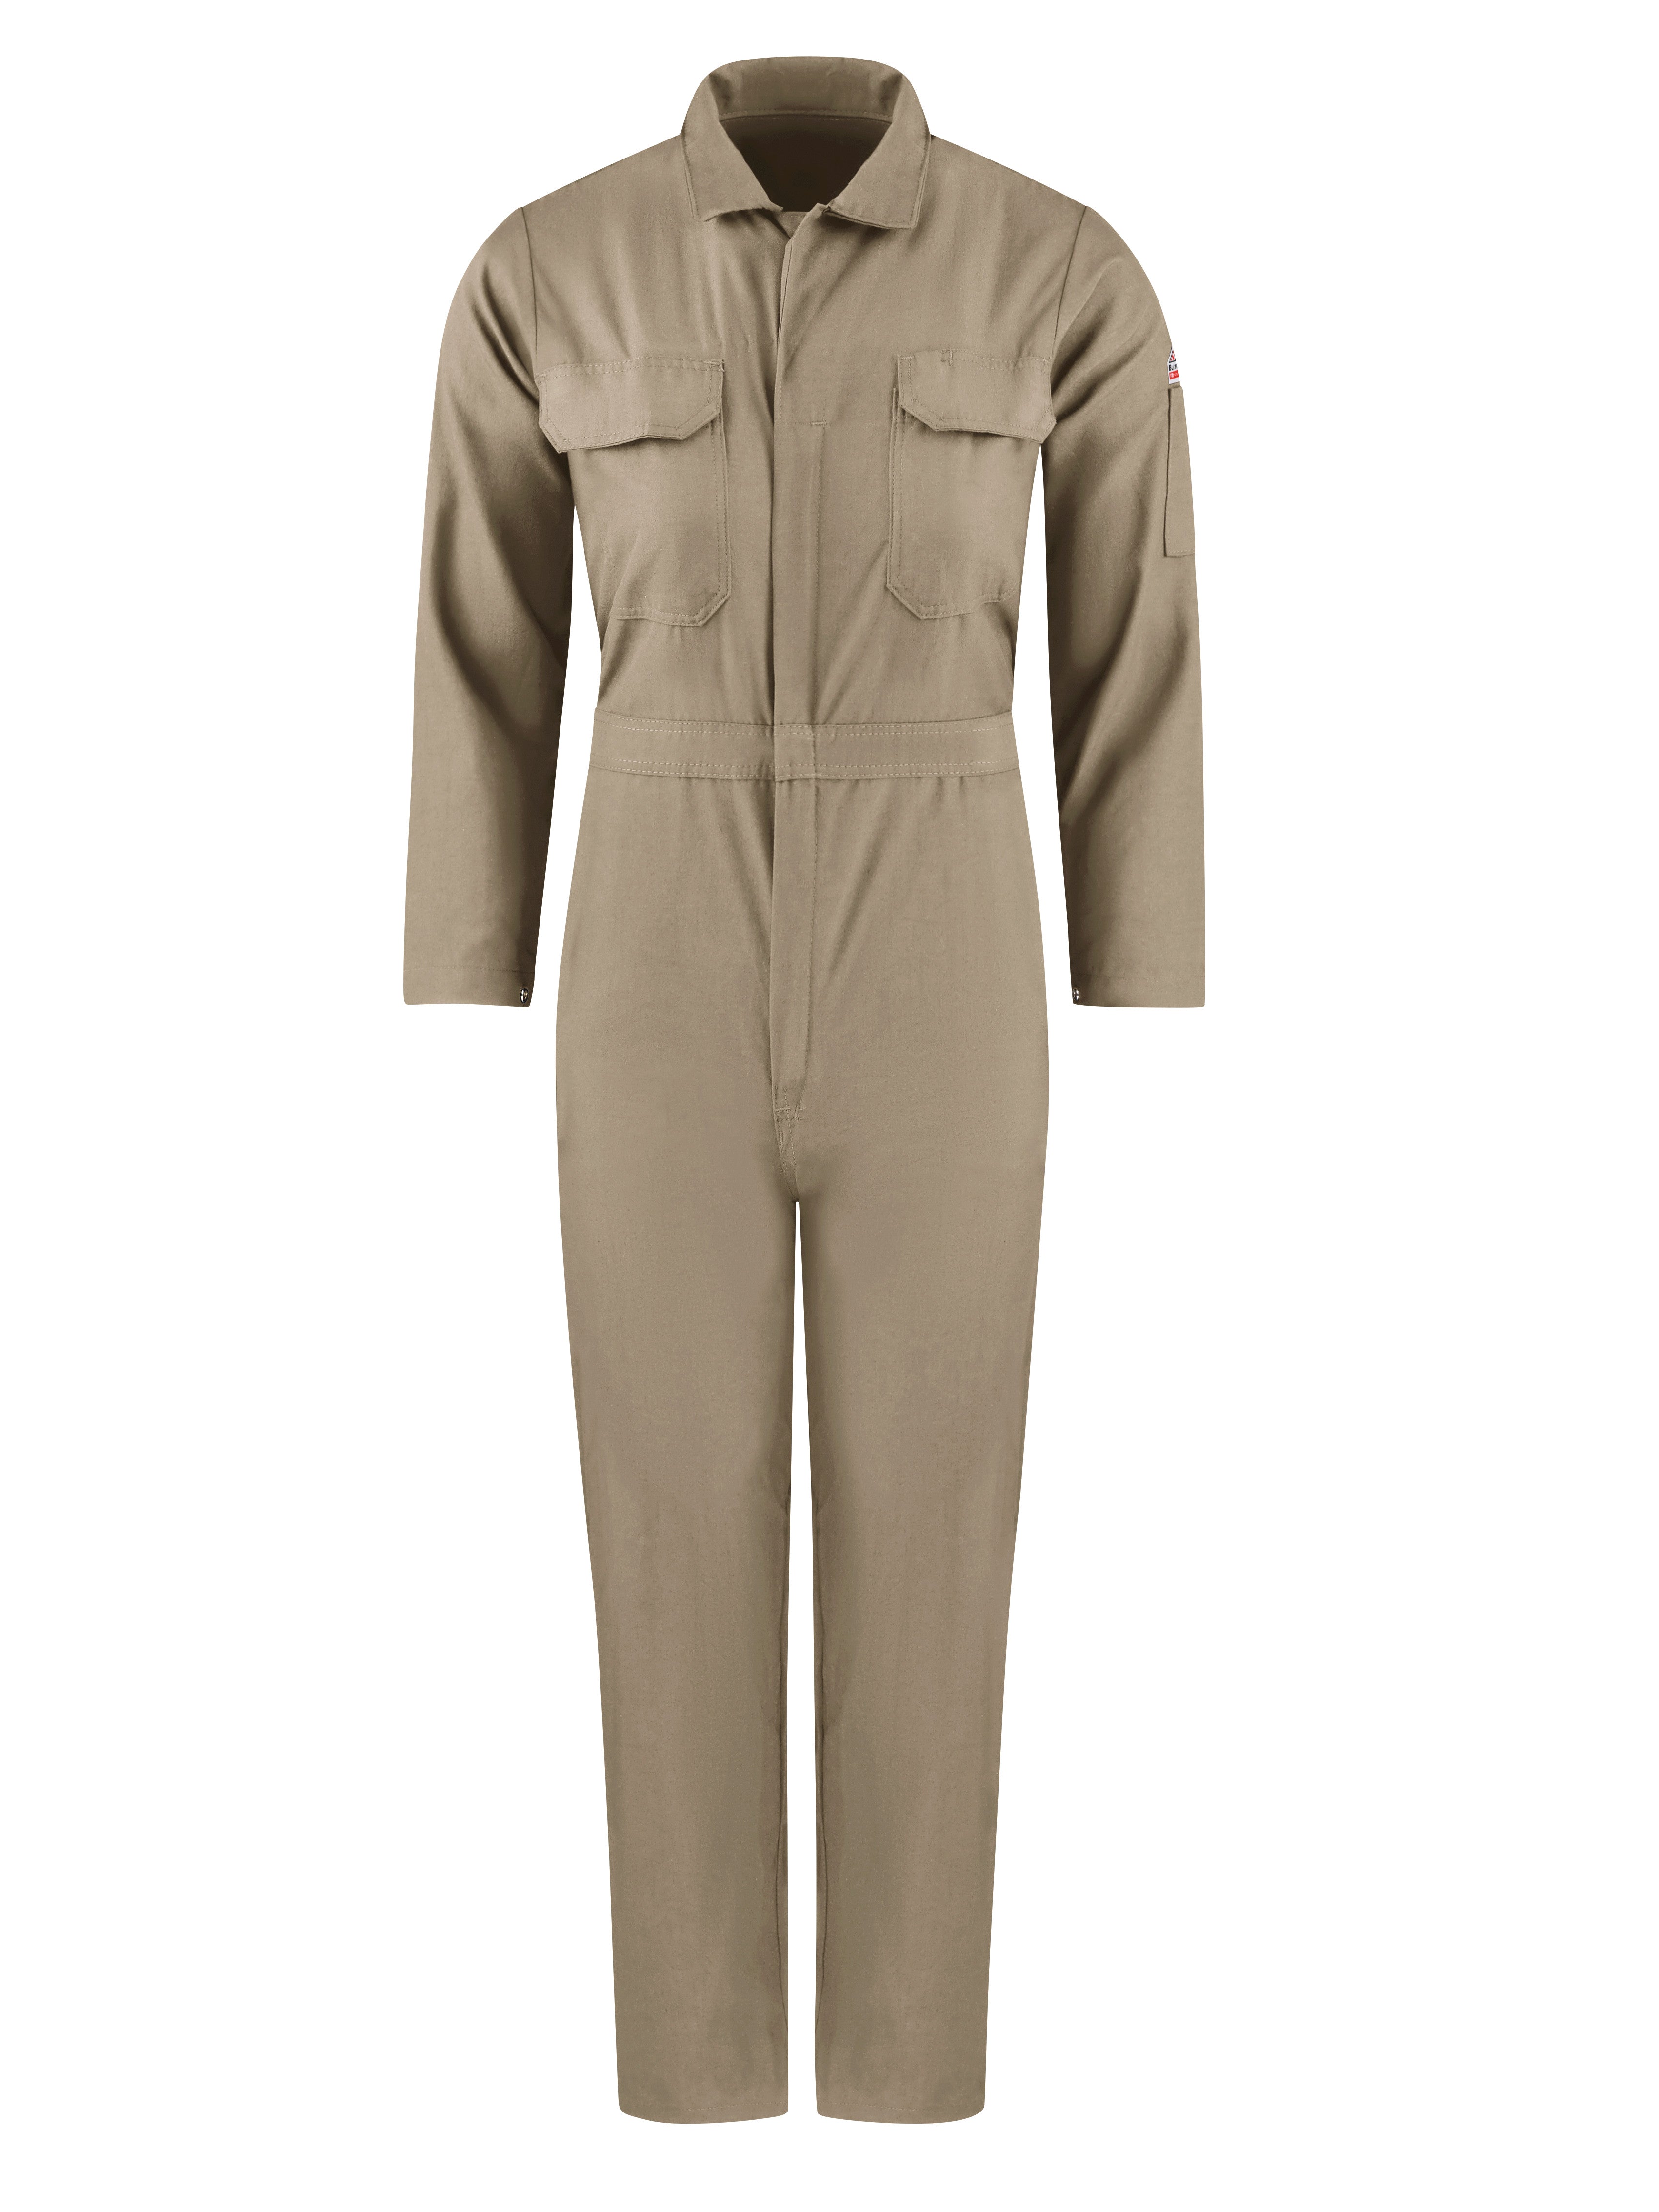 Coverall - UnInsulated CNB3 - Tan